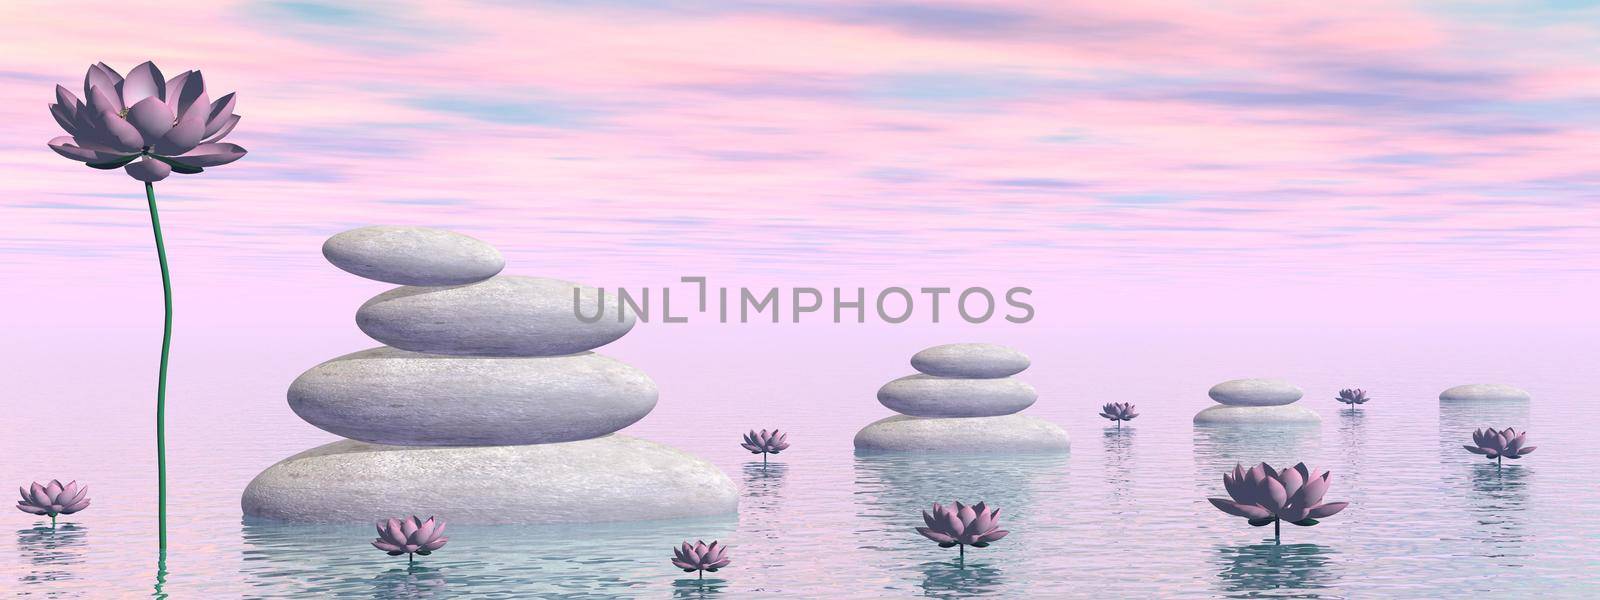 Pink lily flowers and leaves next to white stones upon water by colorful day